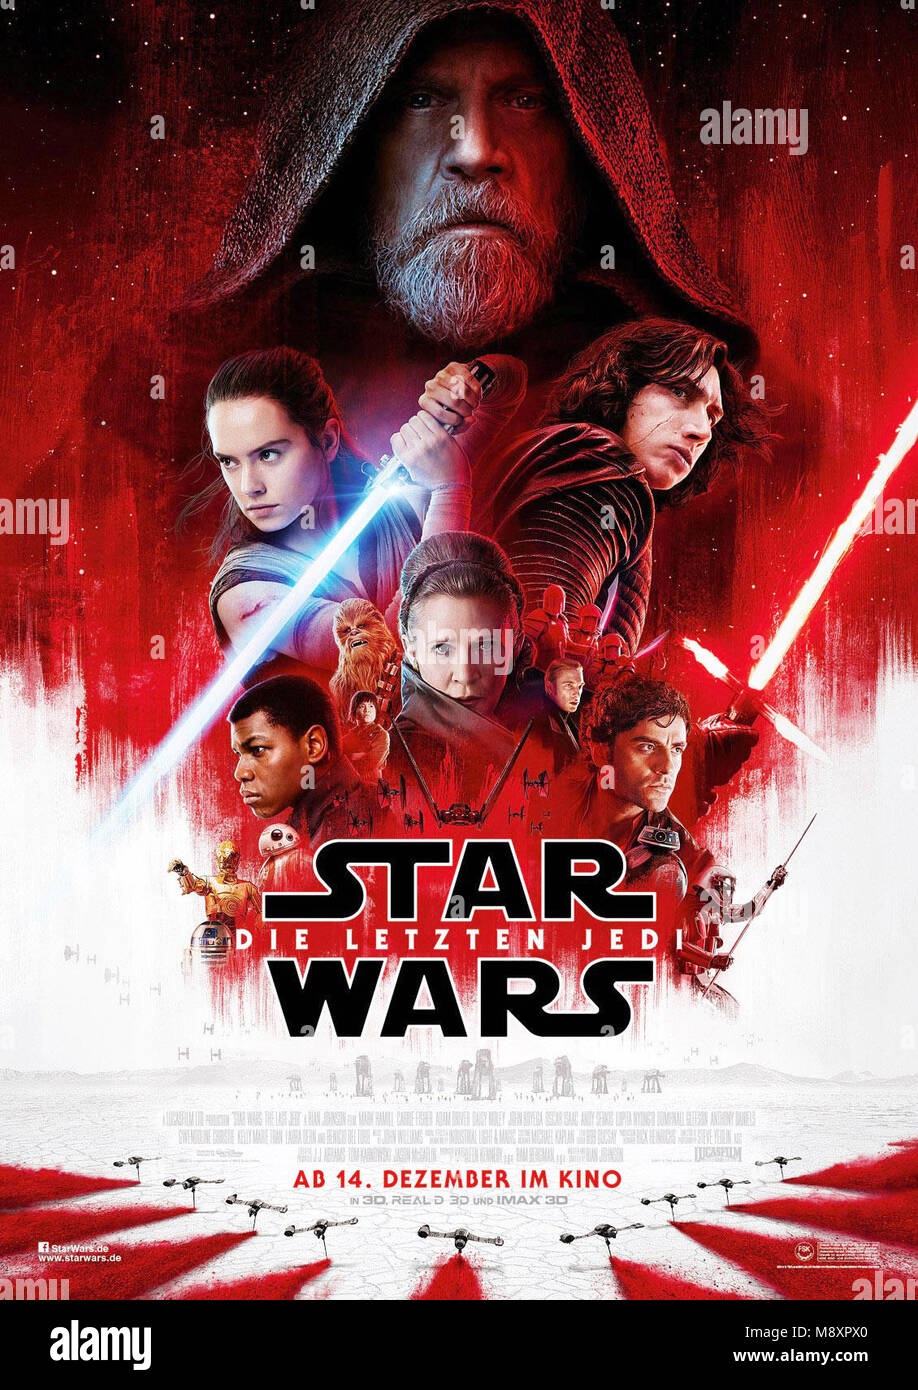 Last jedi poster High Resolution Stock Photography and Images - Alamy